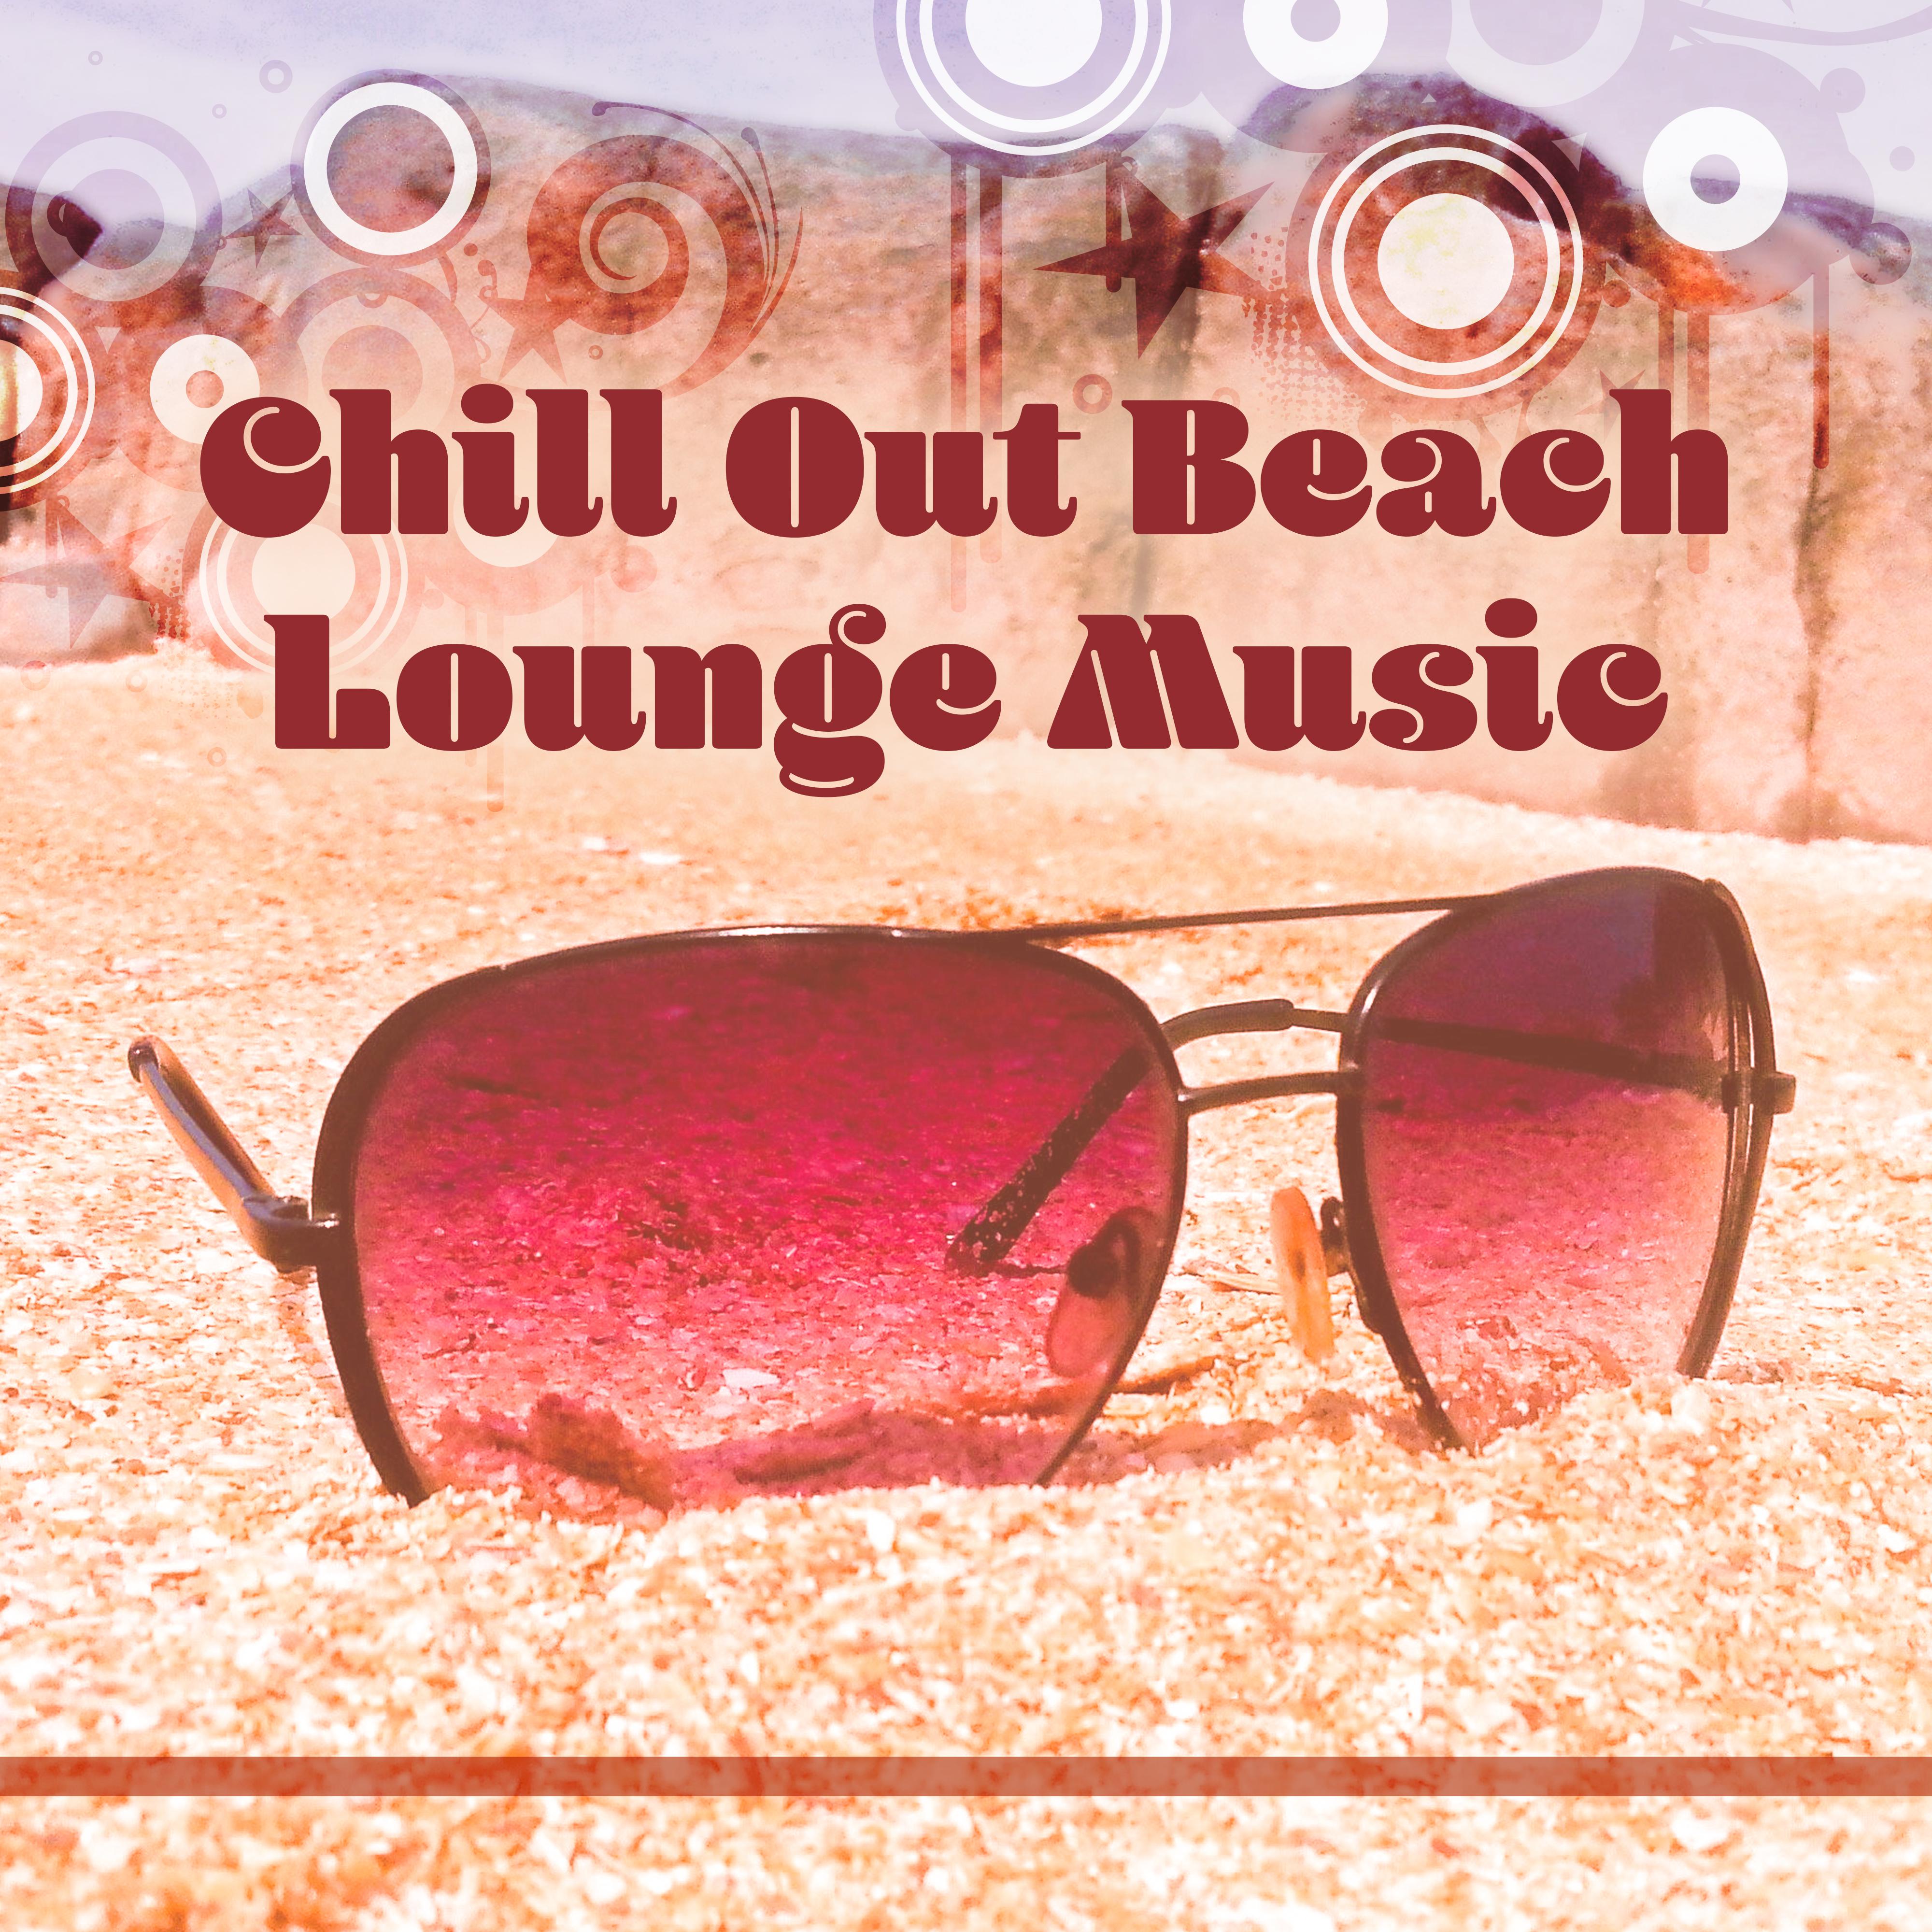 Chill Out Beach Lounge Music  Rest on the Beach, Calming Waves, Relaxing Vibes, Summer Time